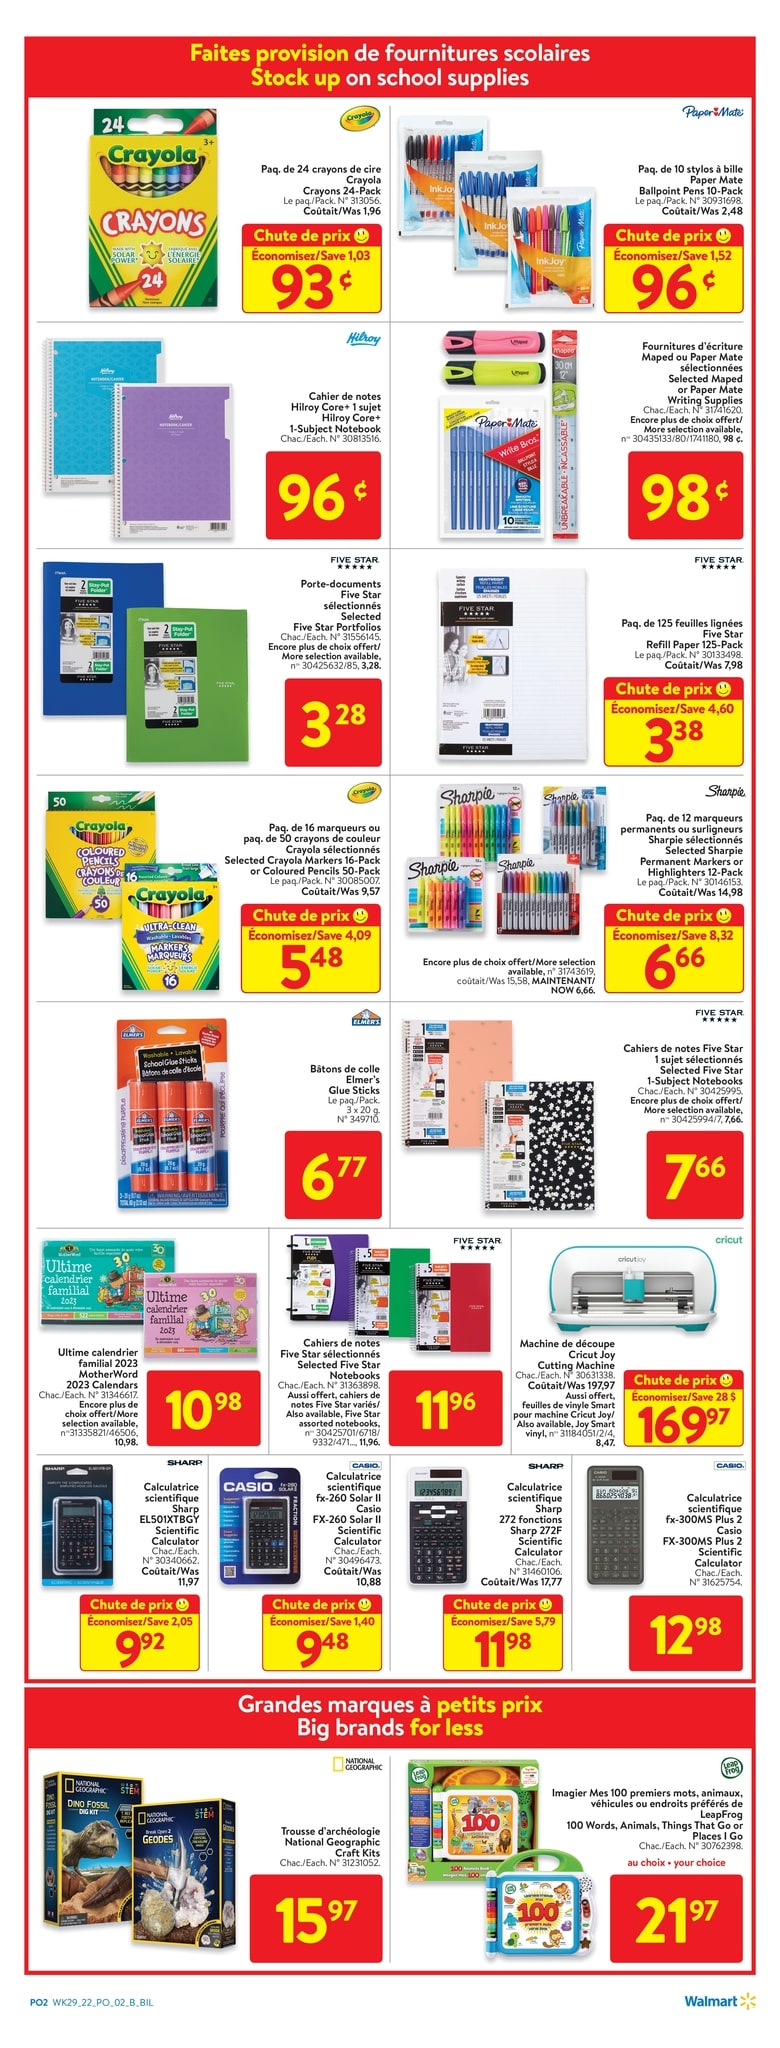 Circulaire Walmart - Fournitures Scolaires - Page 2